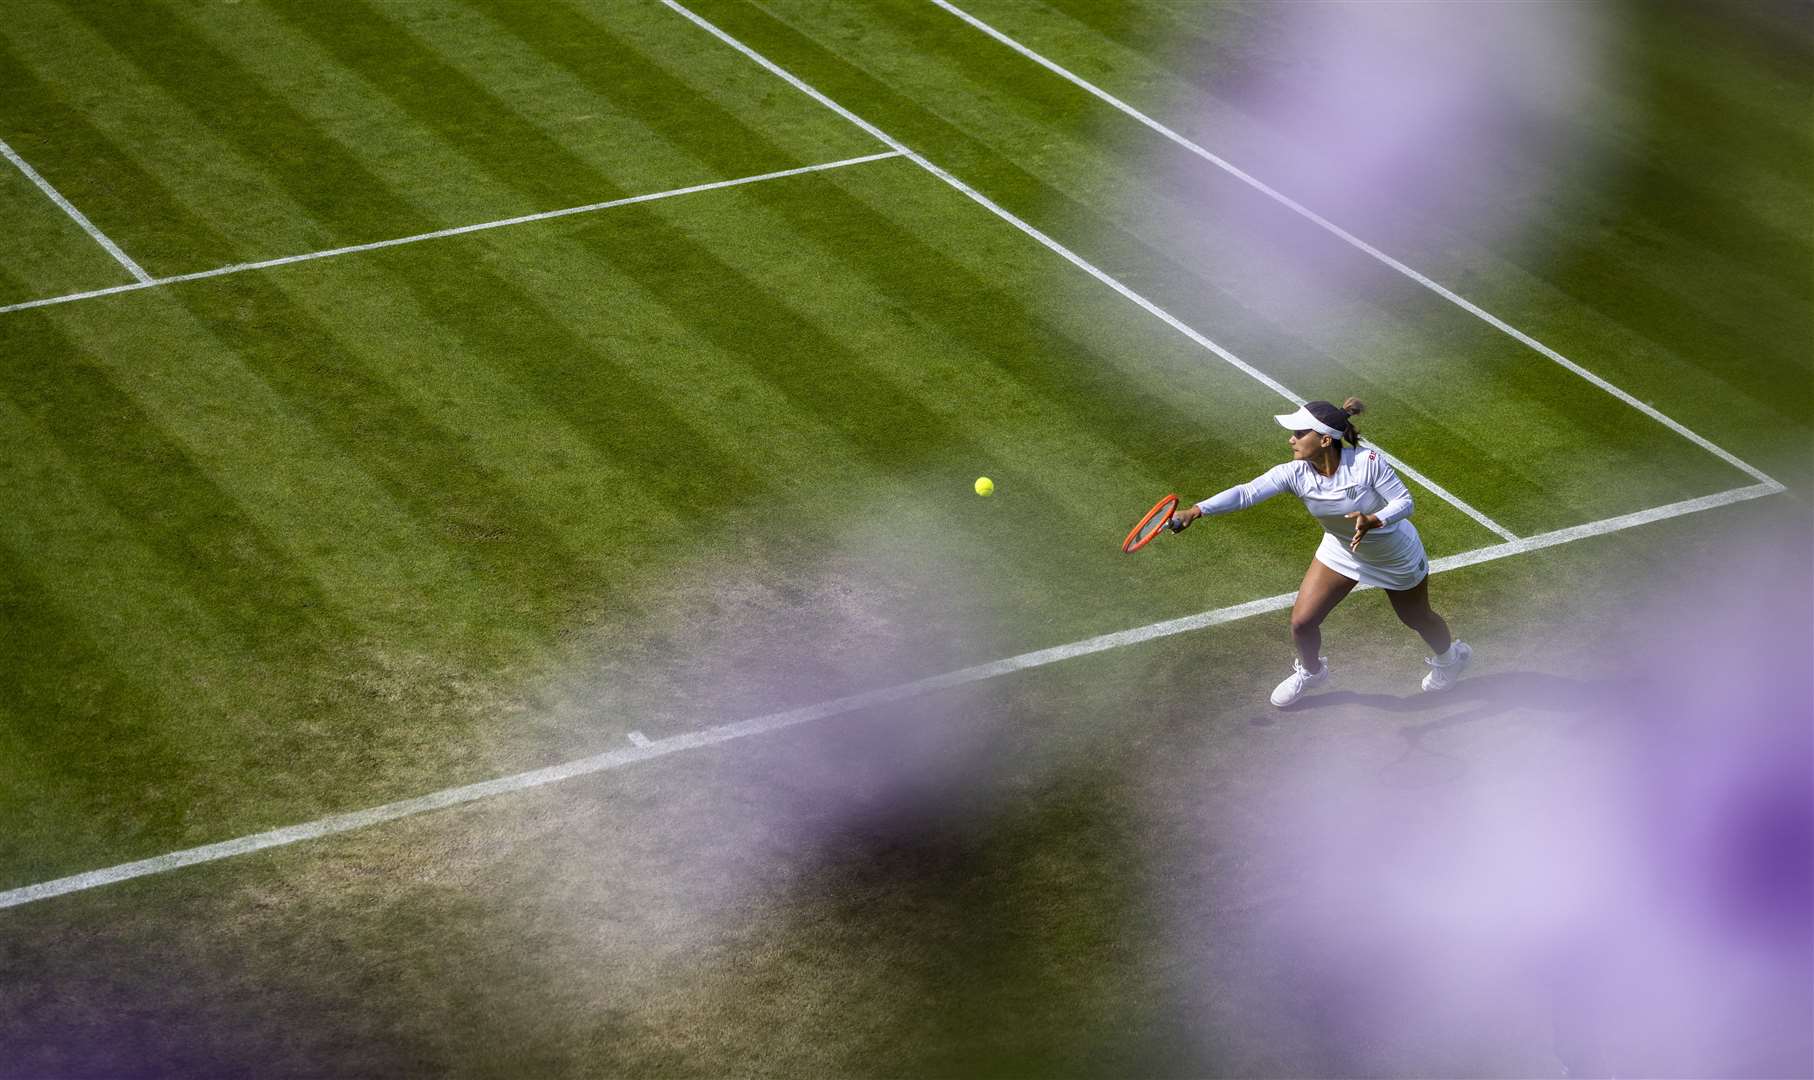 Wimbledon has been quieter than usual as it returns to full capacity in 2022 (Steven Paston/PA)